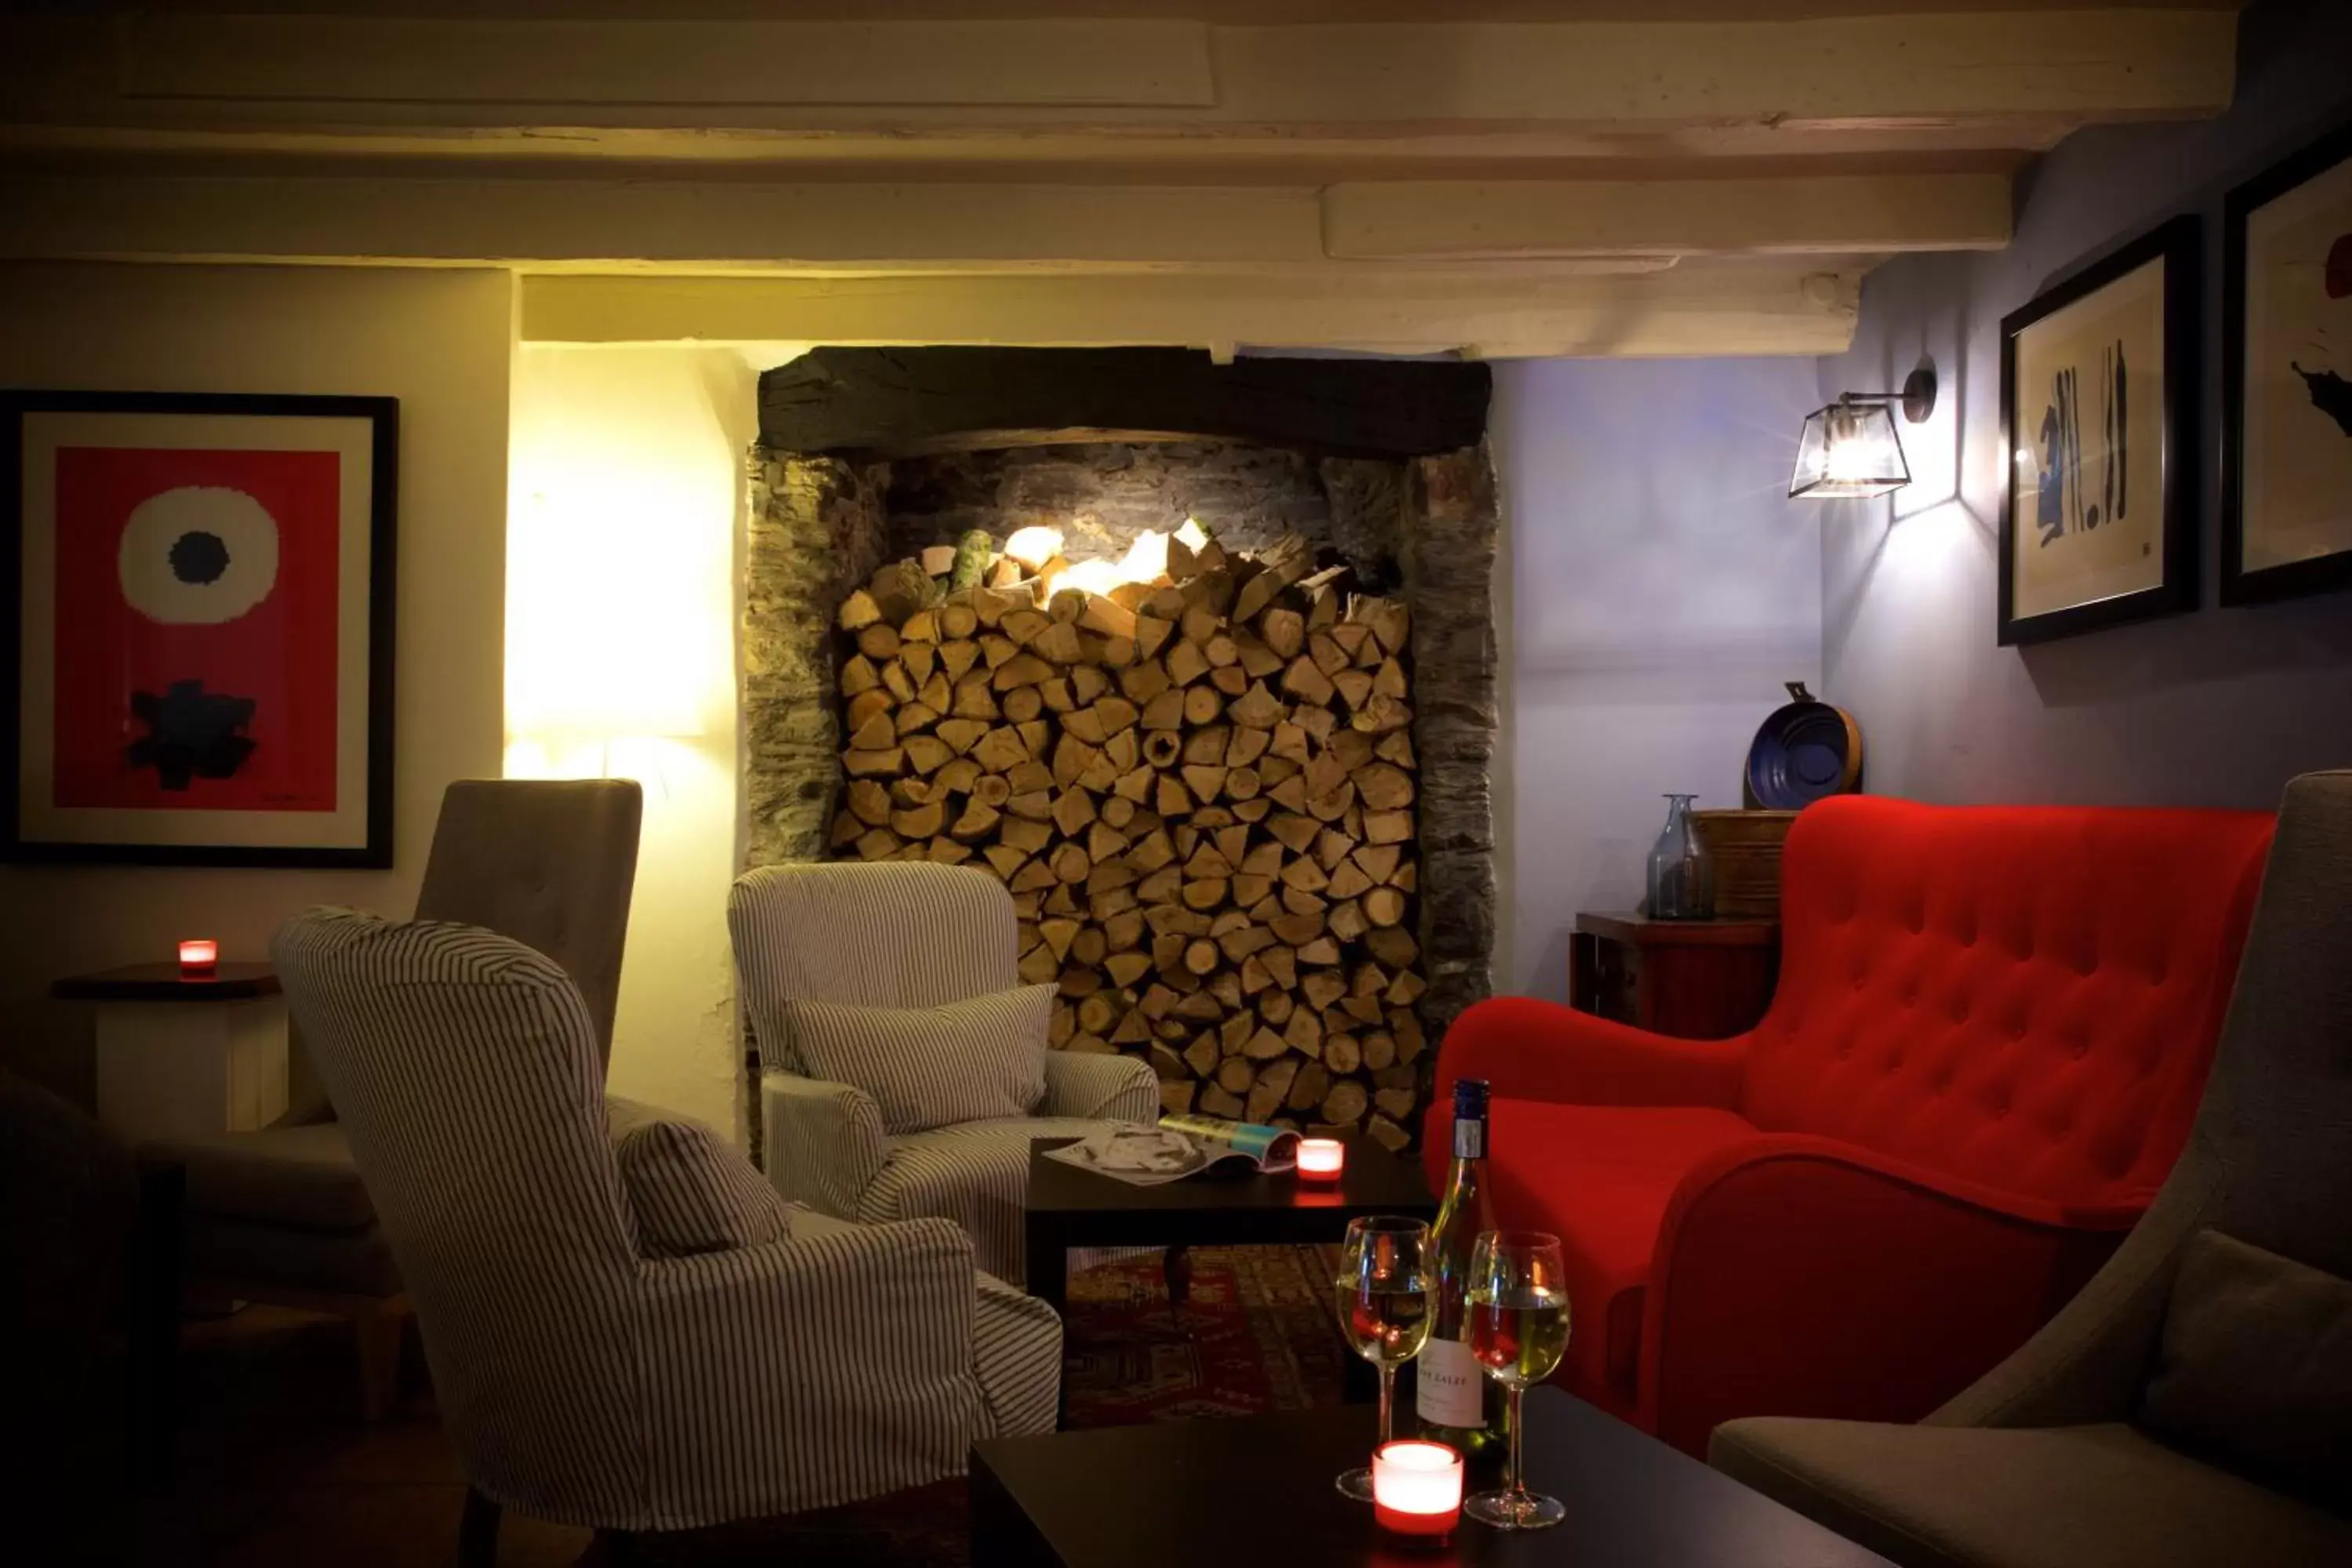 Lounge or bar, Seating Area in Lugger Hotel ‘A Bespoke Hotel’